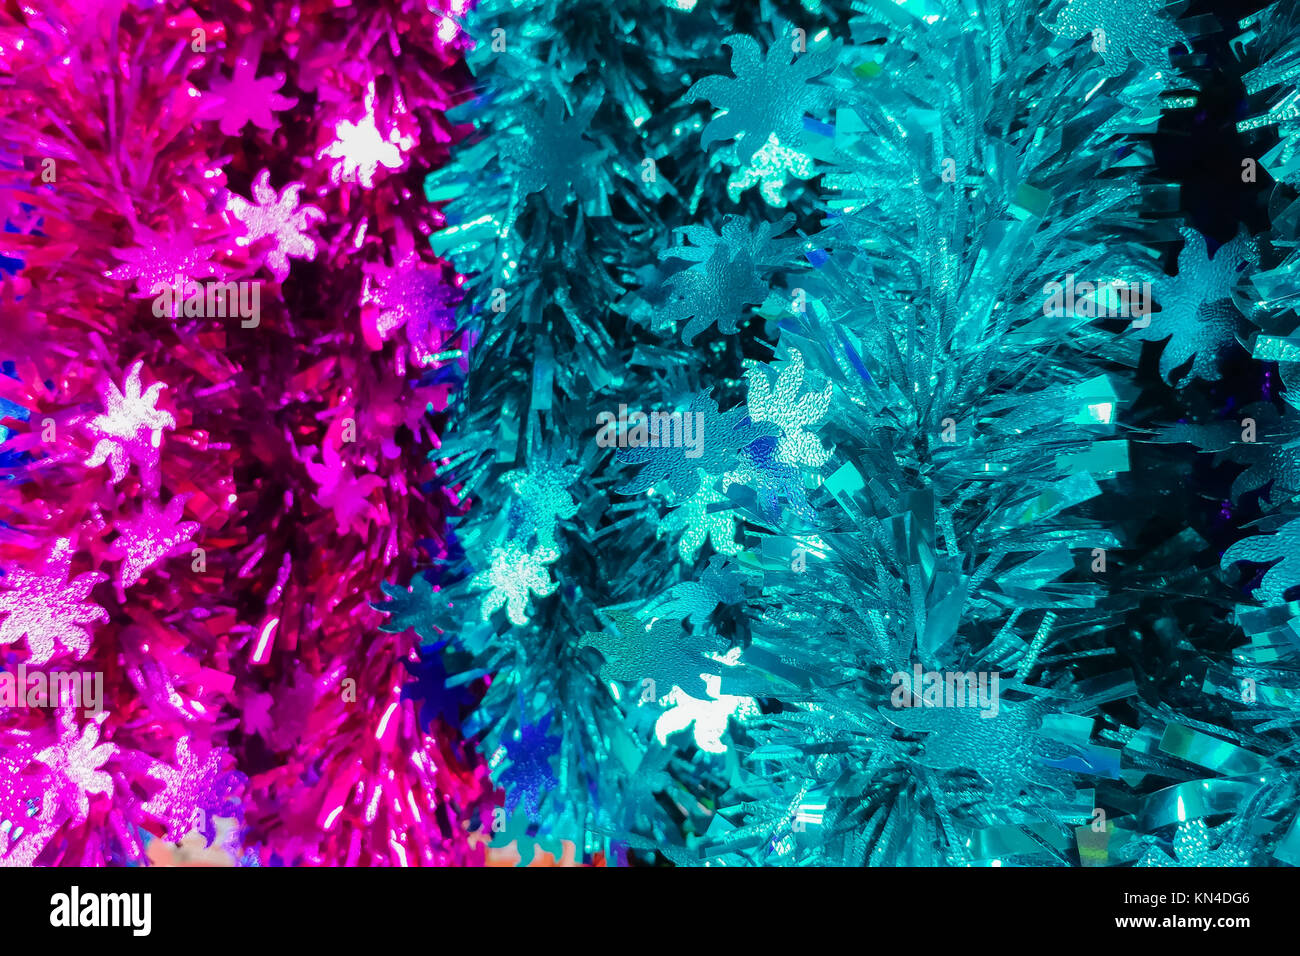 Closed up Christmas decorations equipment colorful background Stock Photo